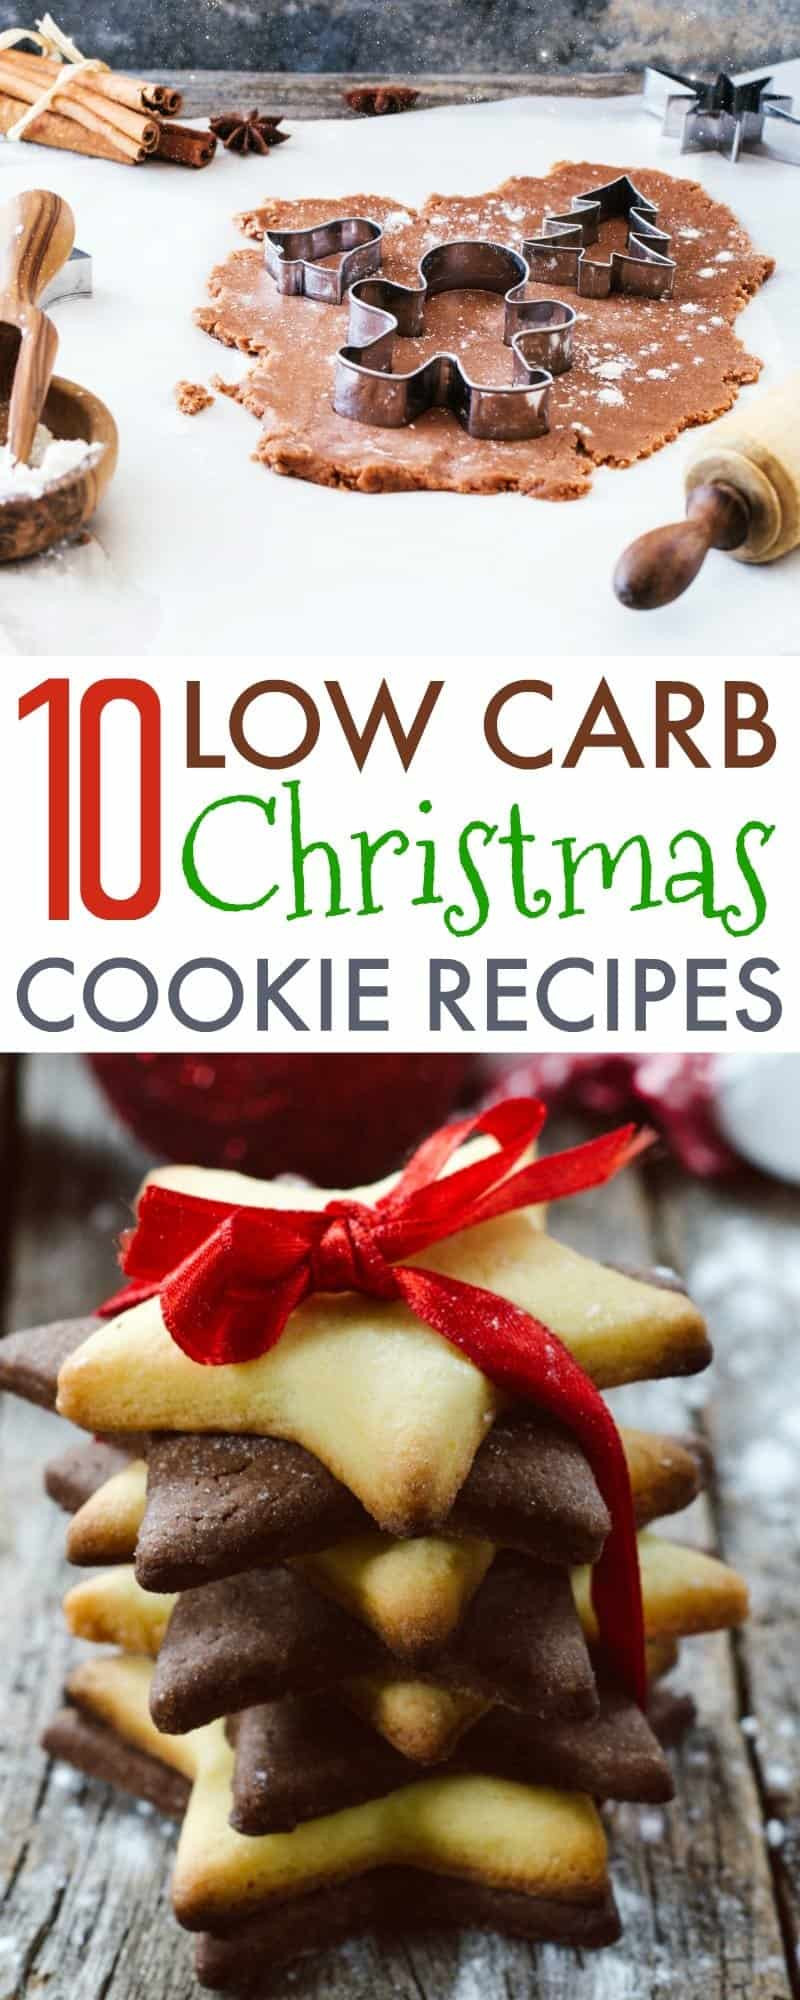 Low Carb Christmas Recipes
 10 Low Carb Christmas Cookies Prep for the Holidays